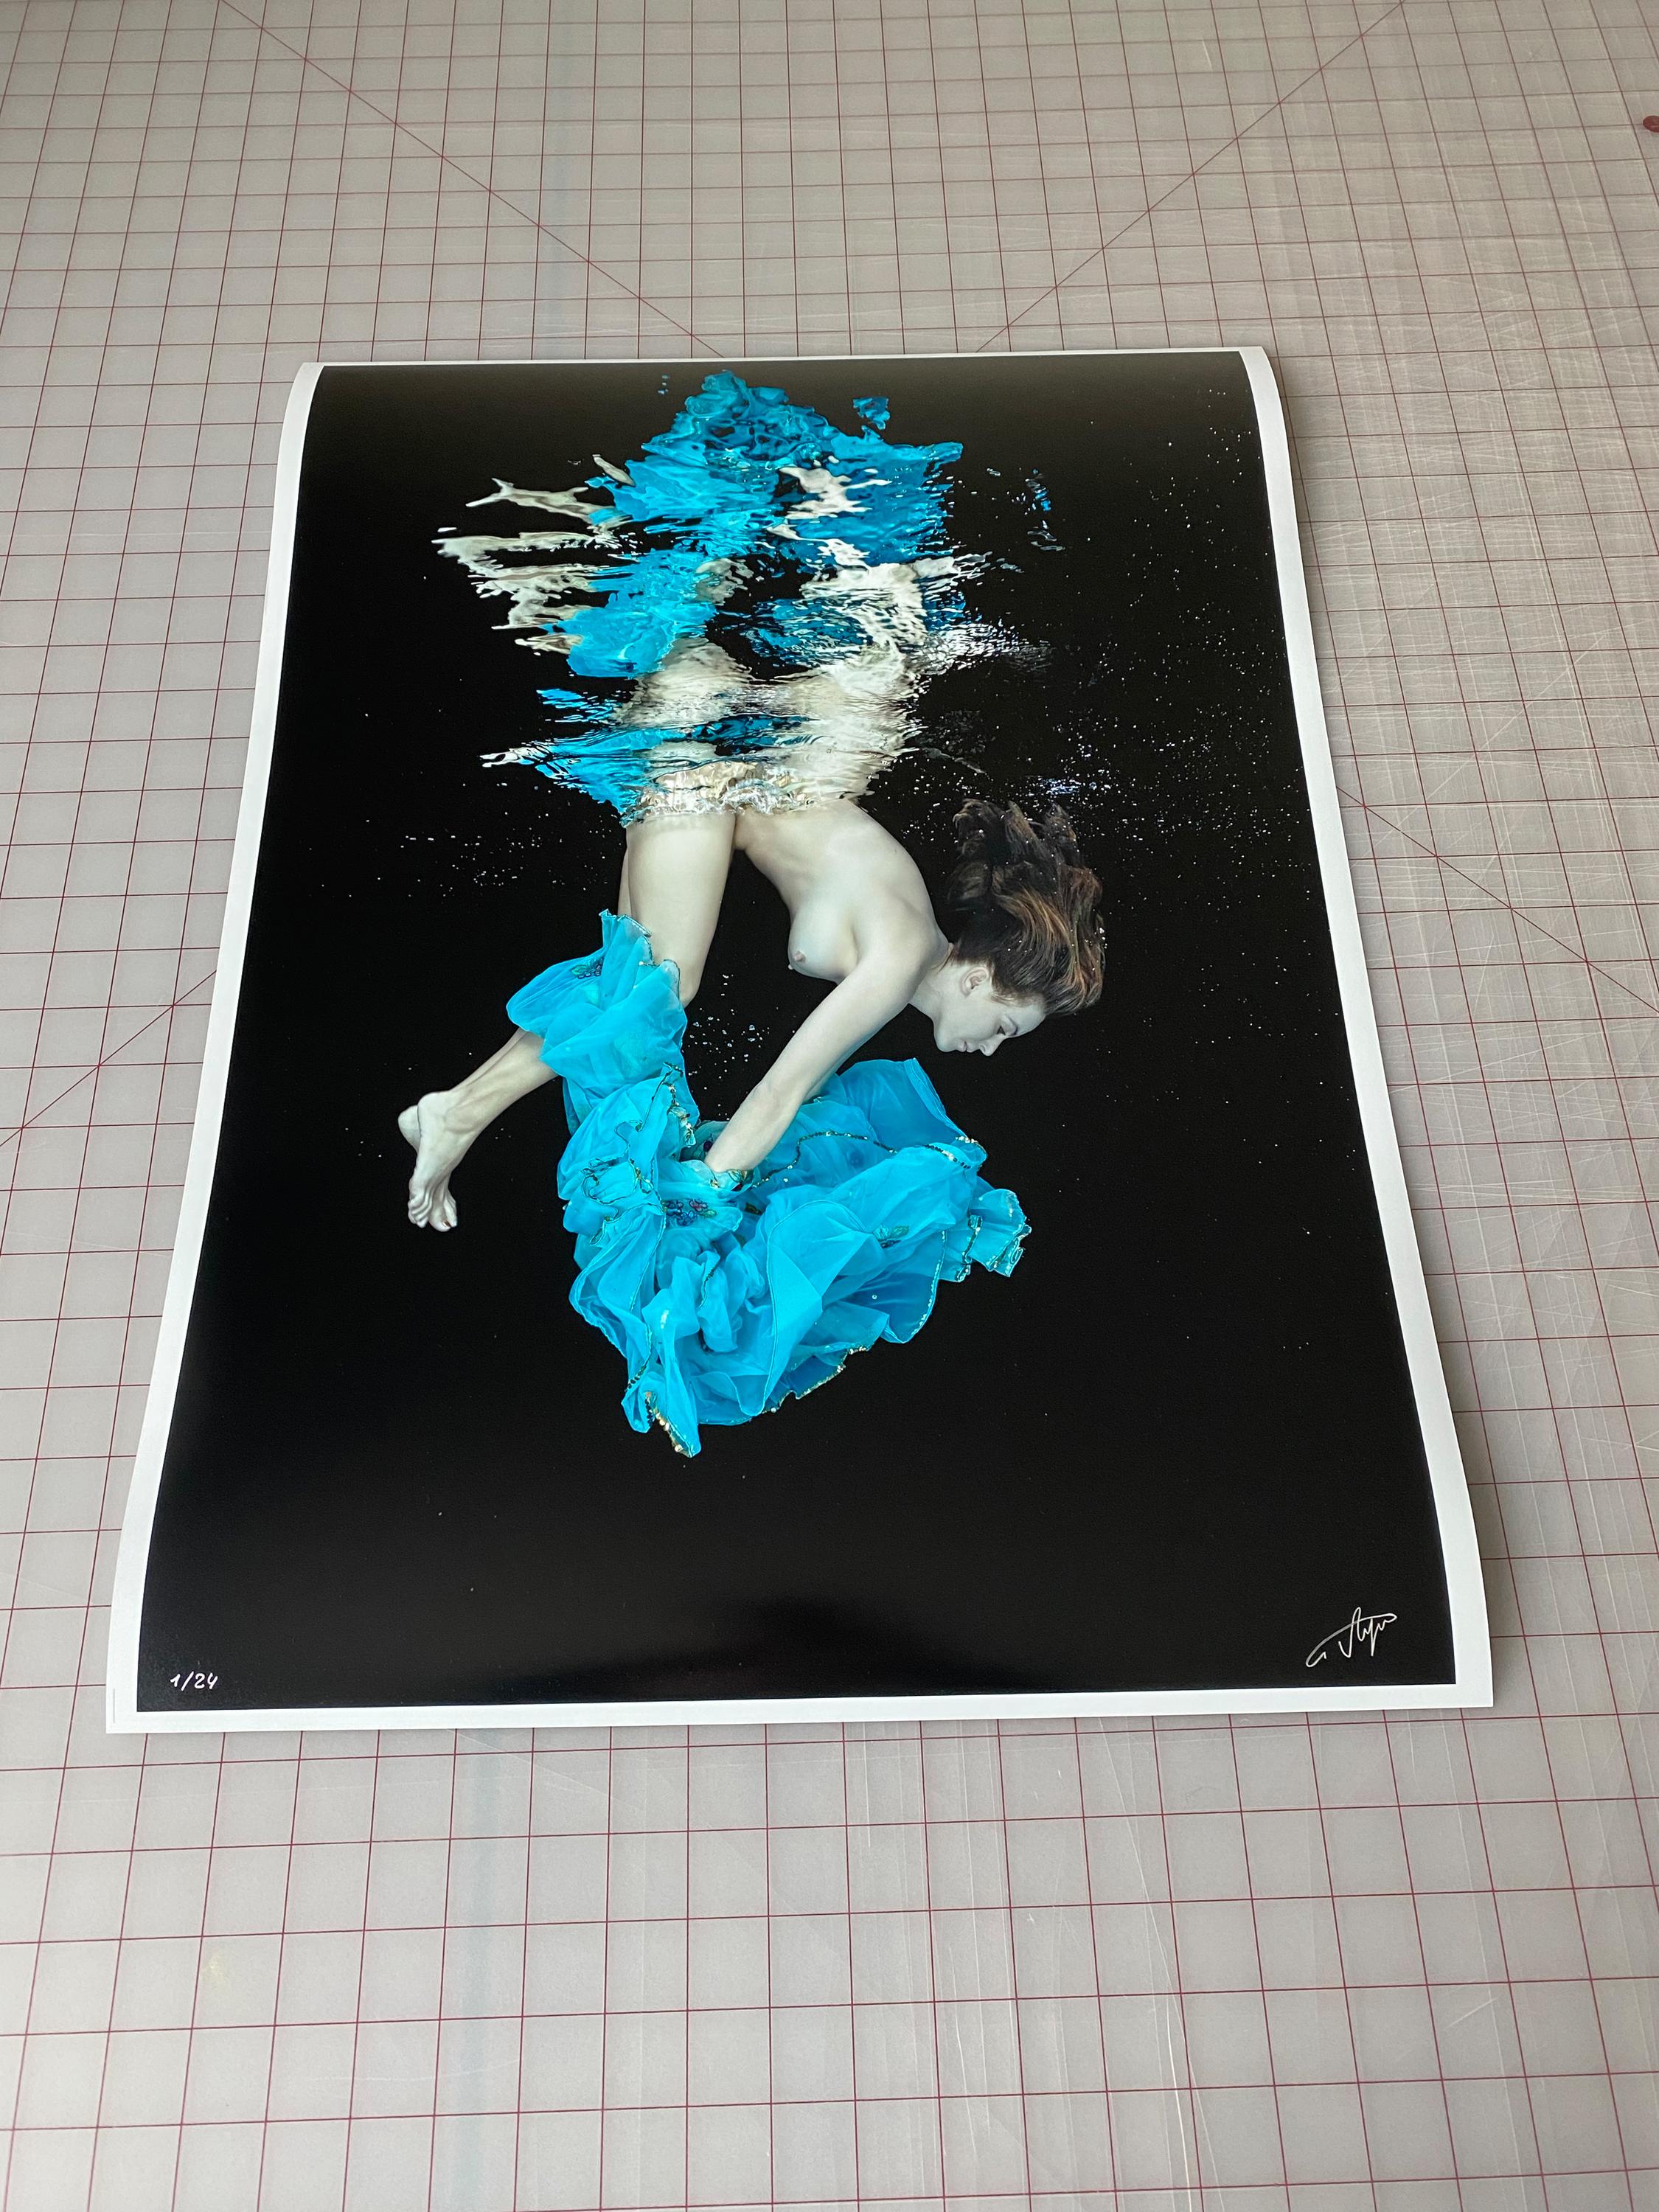 An underwater photograph of a naked young women diving next to the bright turquoise dress she just took off. 

Original gallery quality print signed by the artist. 
Digital archival pigment print. 
Paper size 24